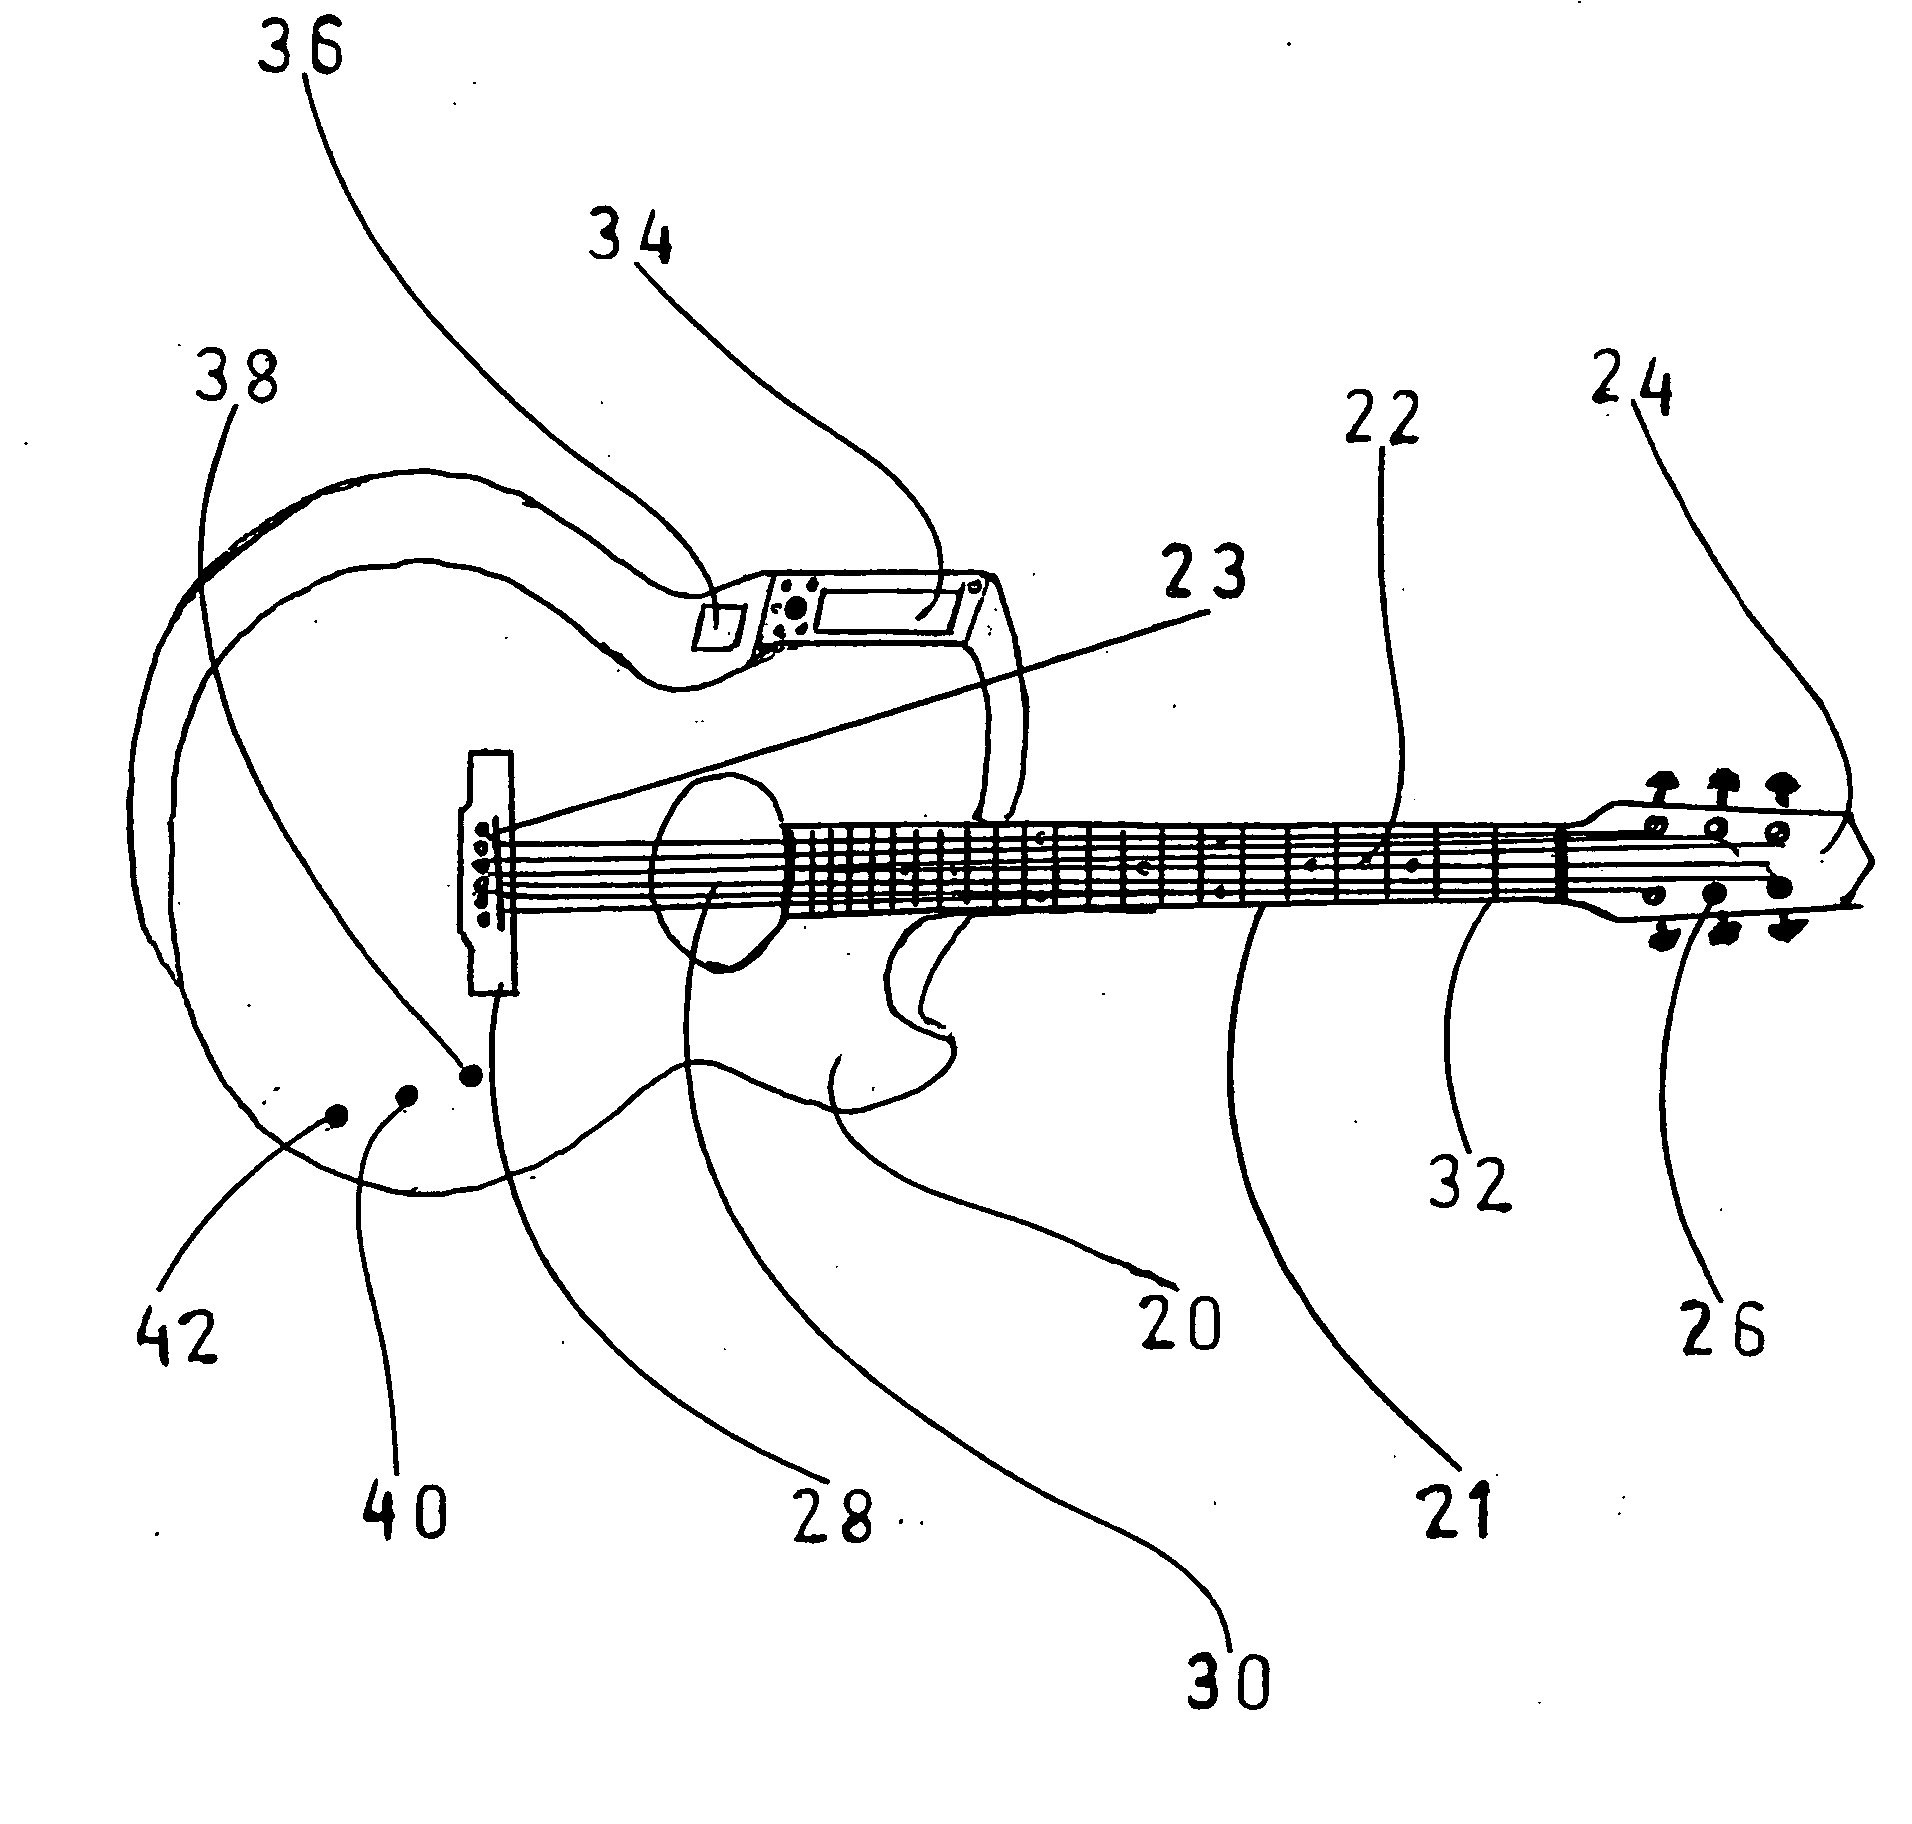 Stringed musical instrument having a built in hand-held type computer